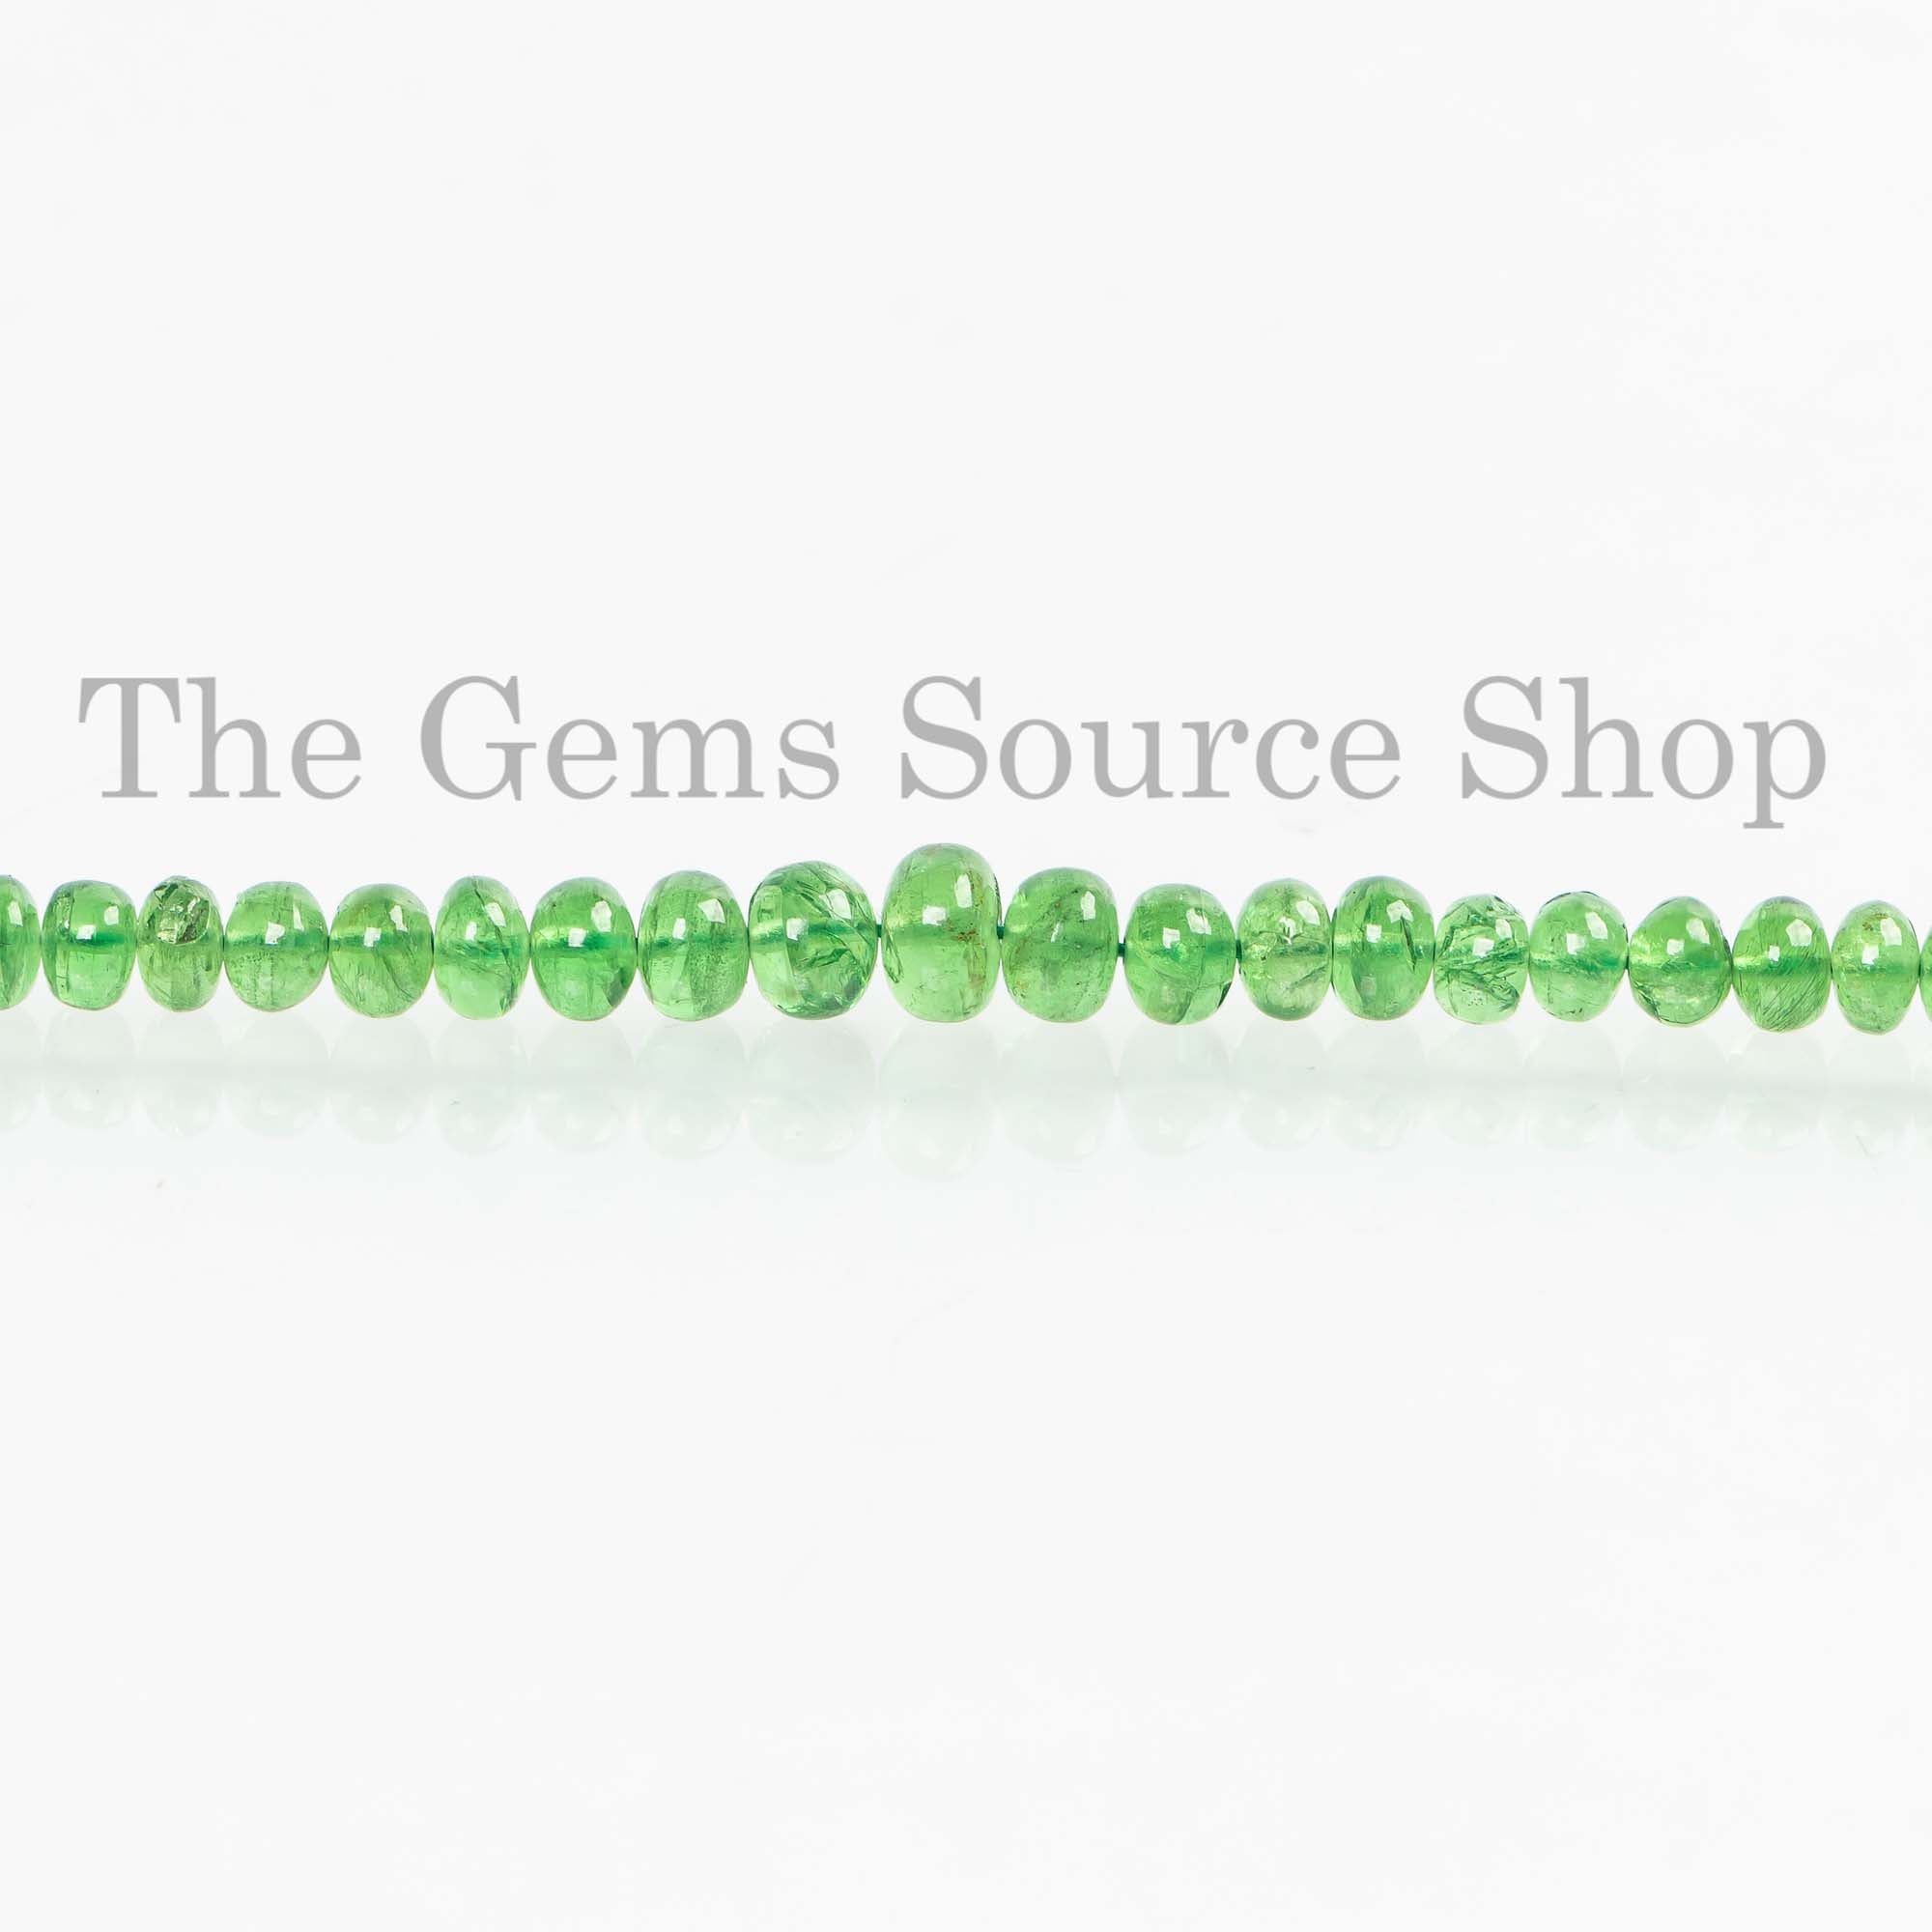 Top Quality Tsavorite Rondelle Beads, 3.5-6mm Tsavorite Beads, Tsavorite Plain Rondelle Beads, Tsavorite Smooth Beads, Beads For Jewelry